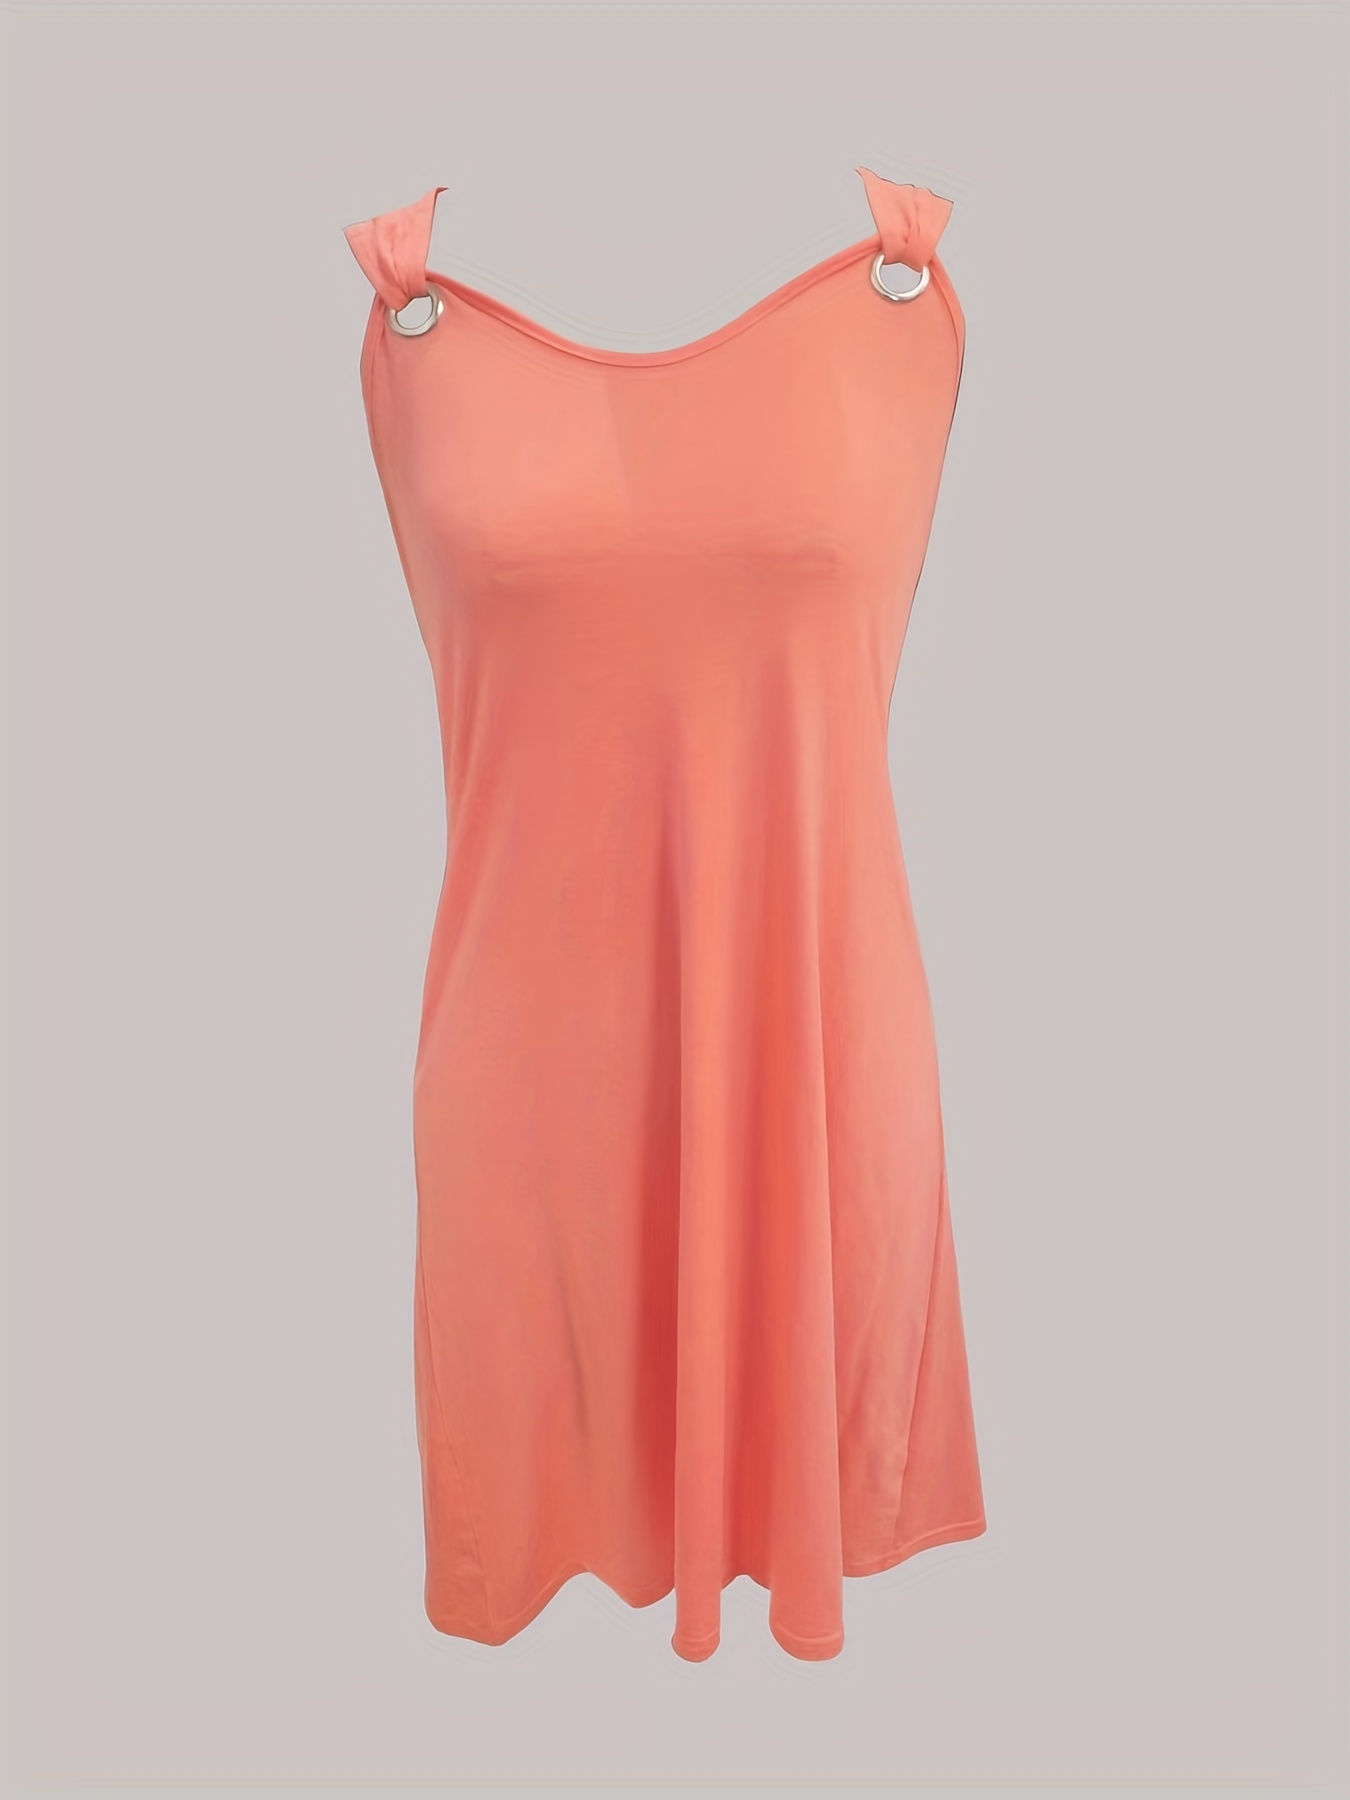 solid simple dress casual v neck sleeveless summer dress womens clothing